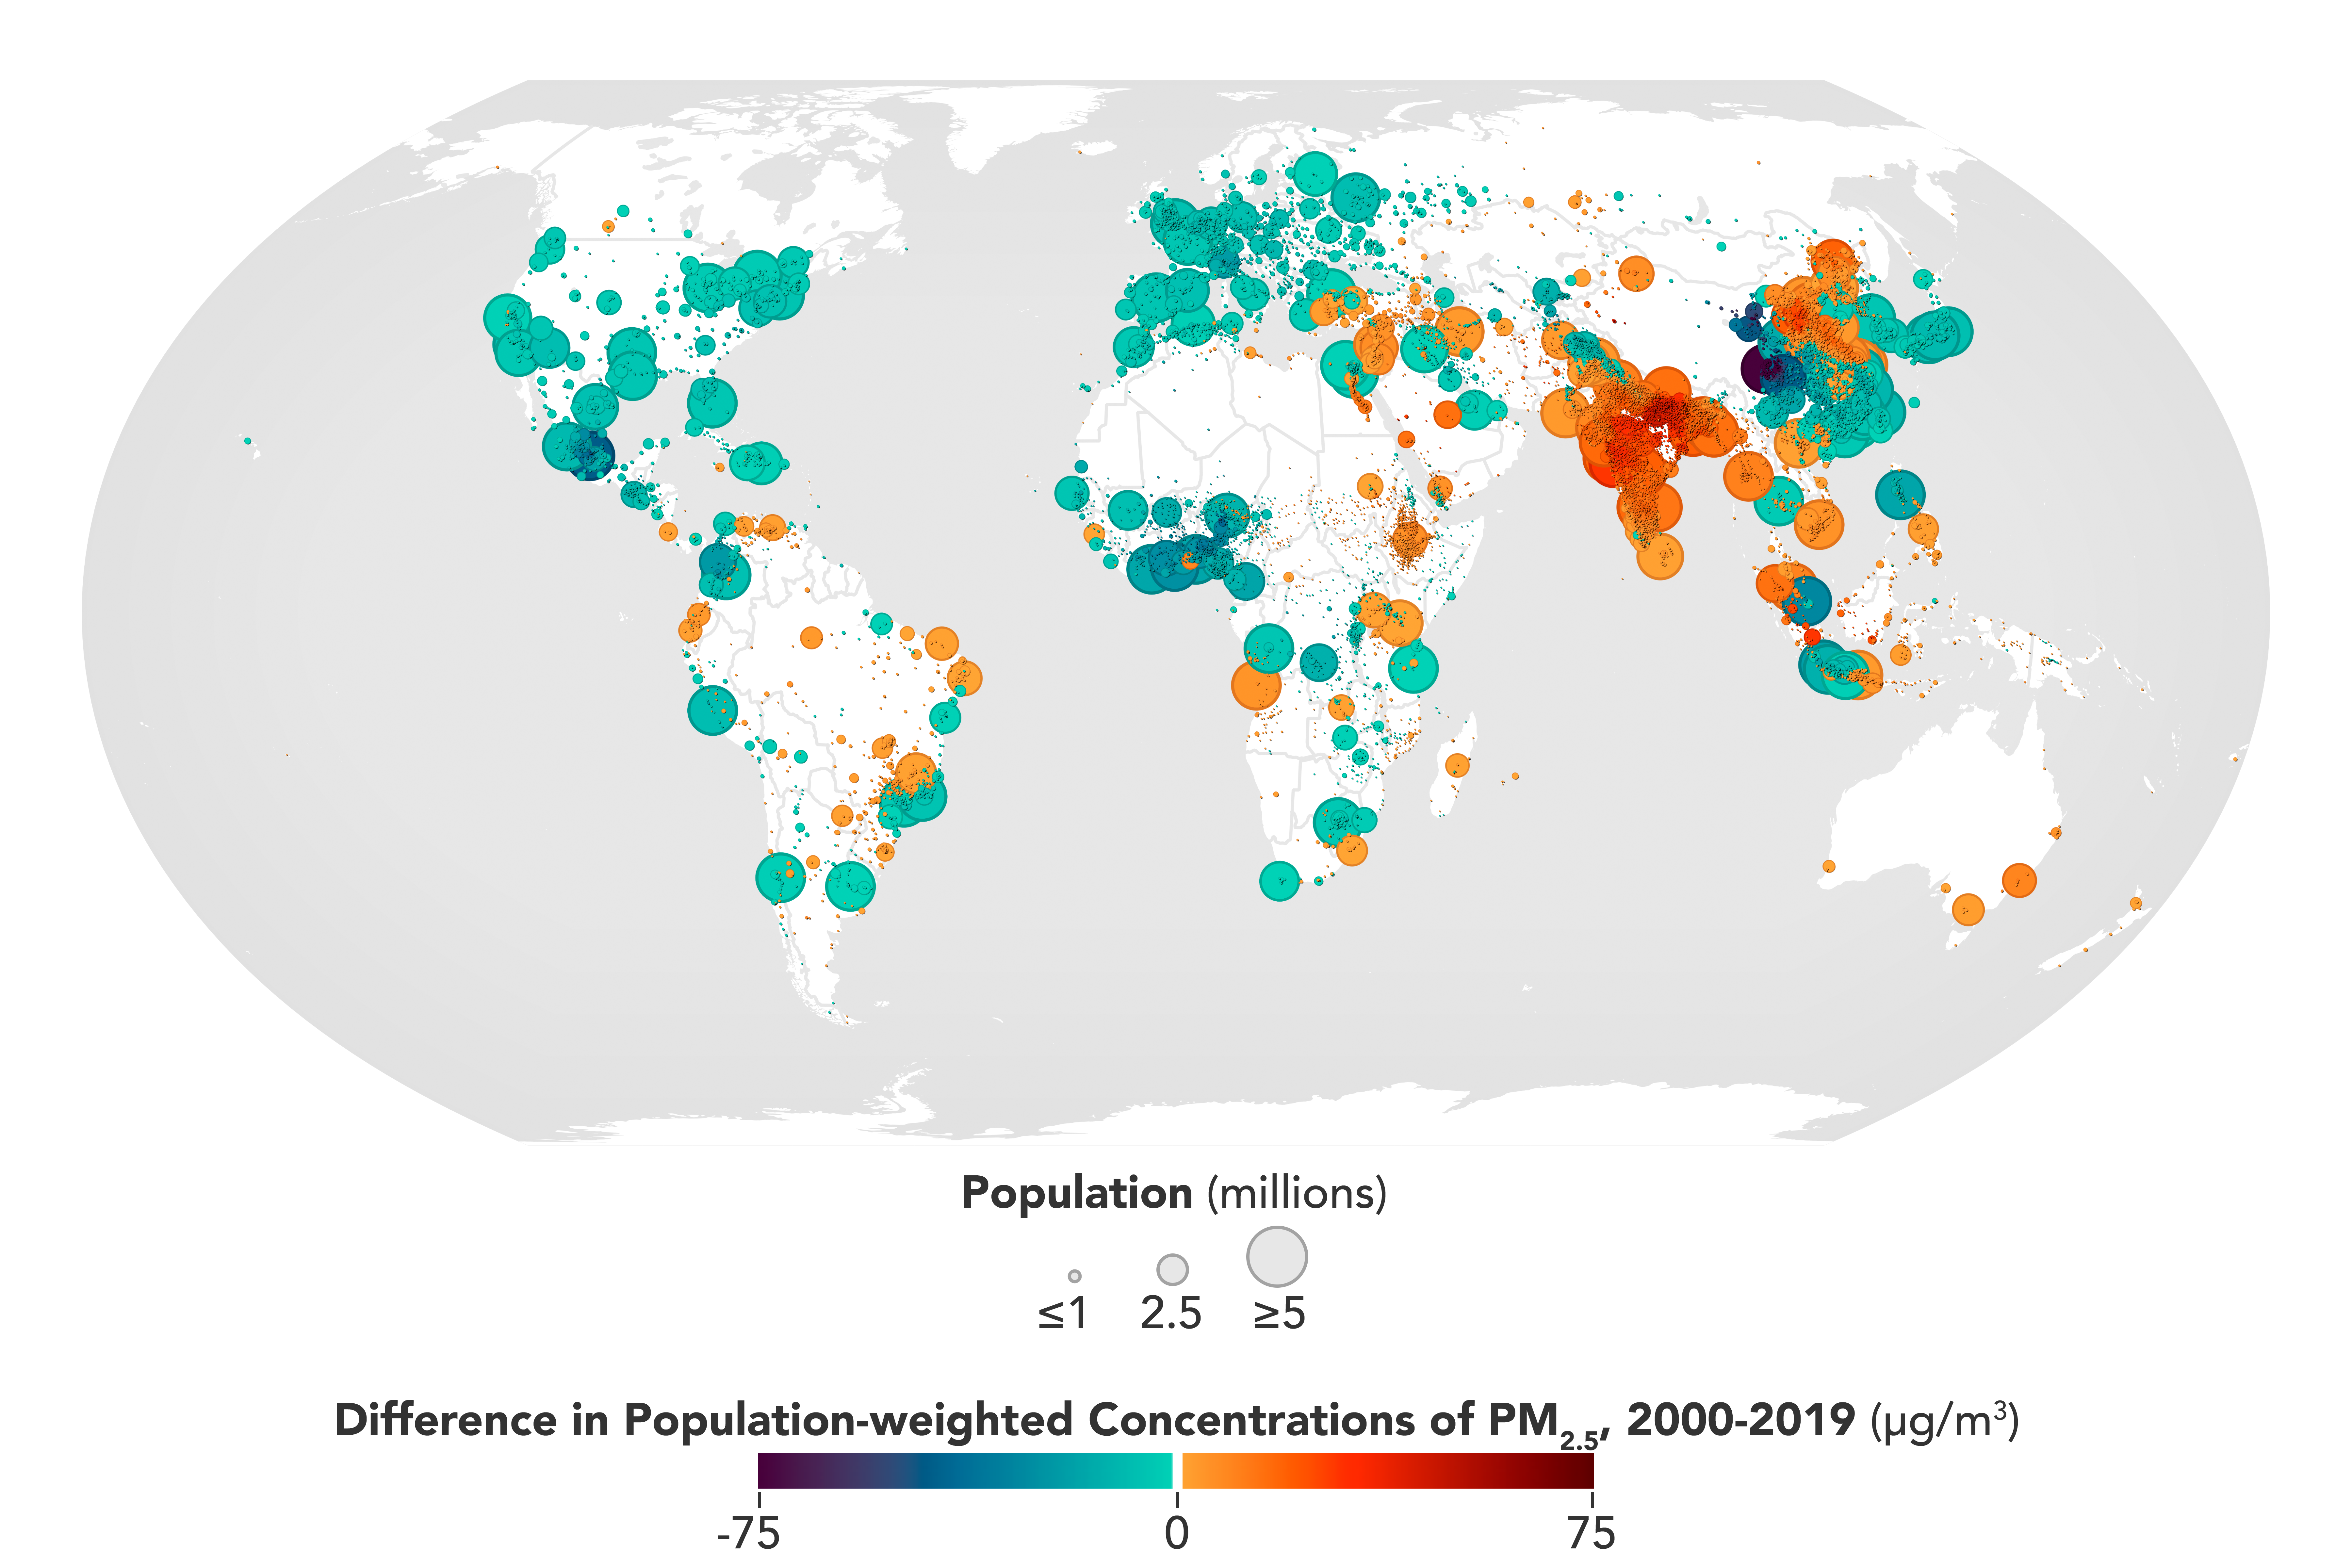 Difference in Population Weighted Concentrations of PM2.5 2000-2019